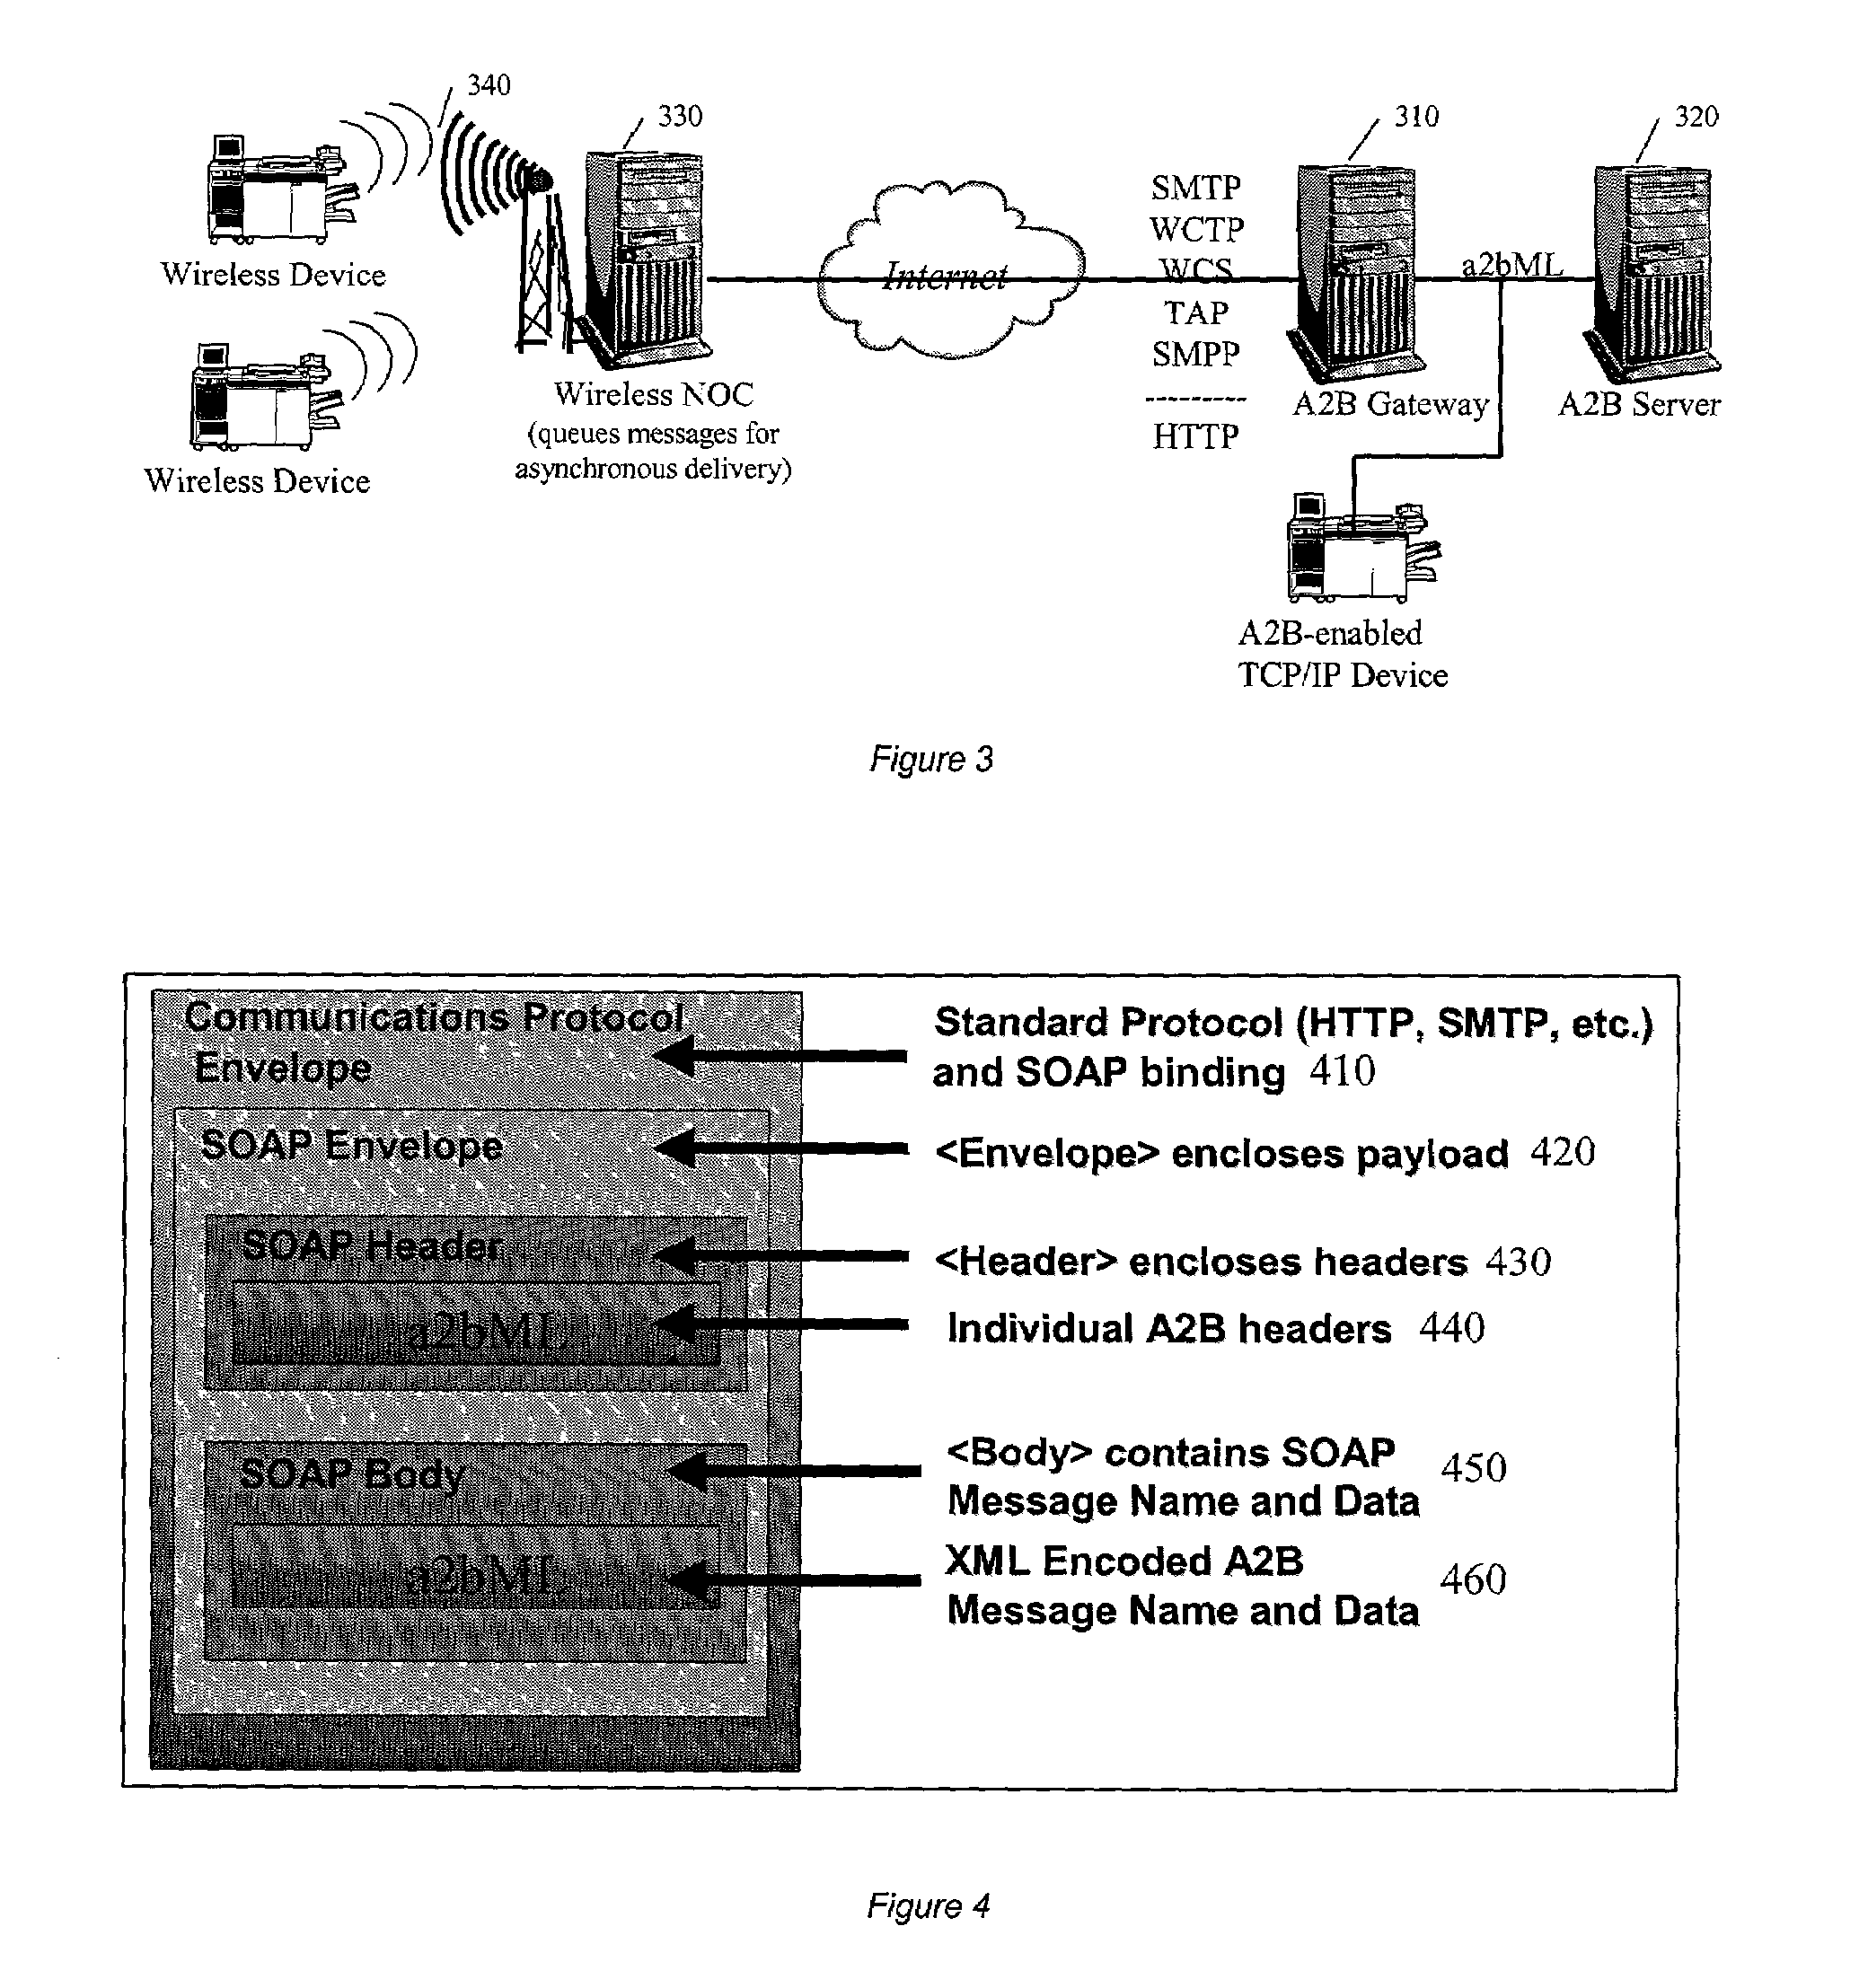 Method and apparatus for managing intelligent assets in a distributed environment